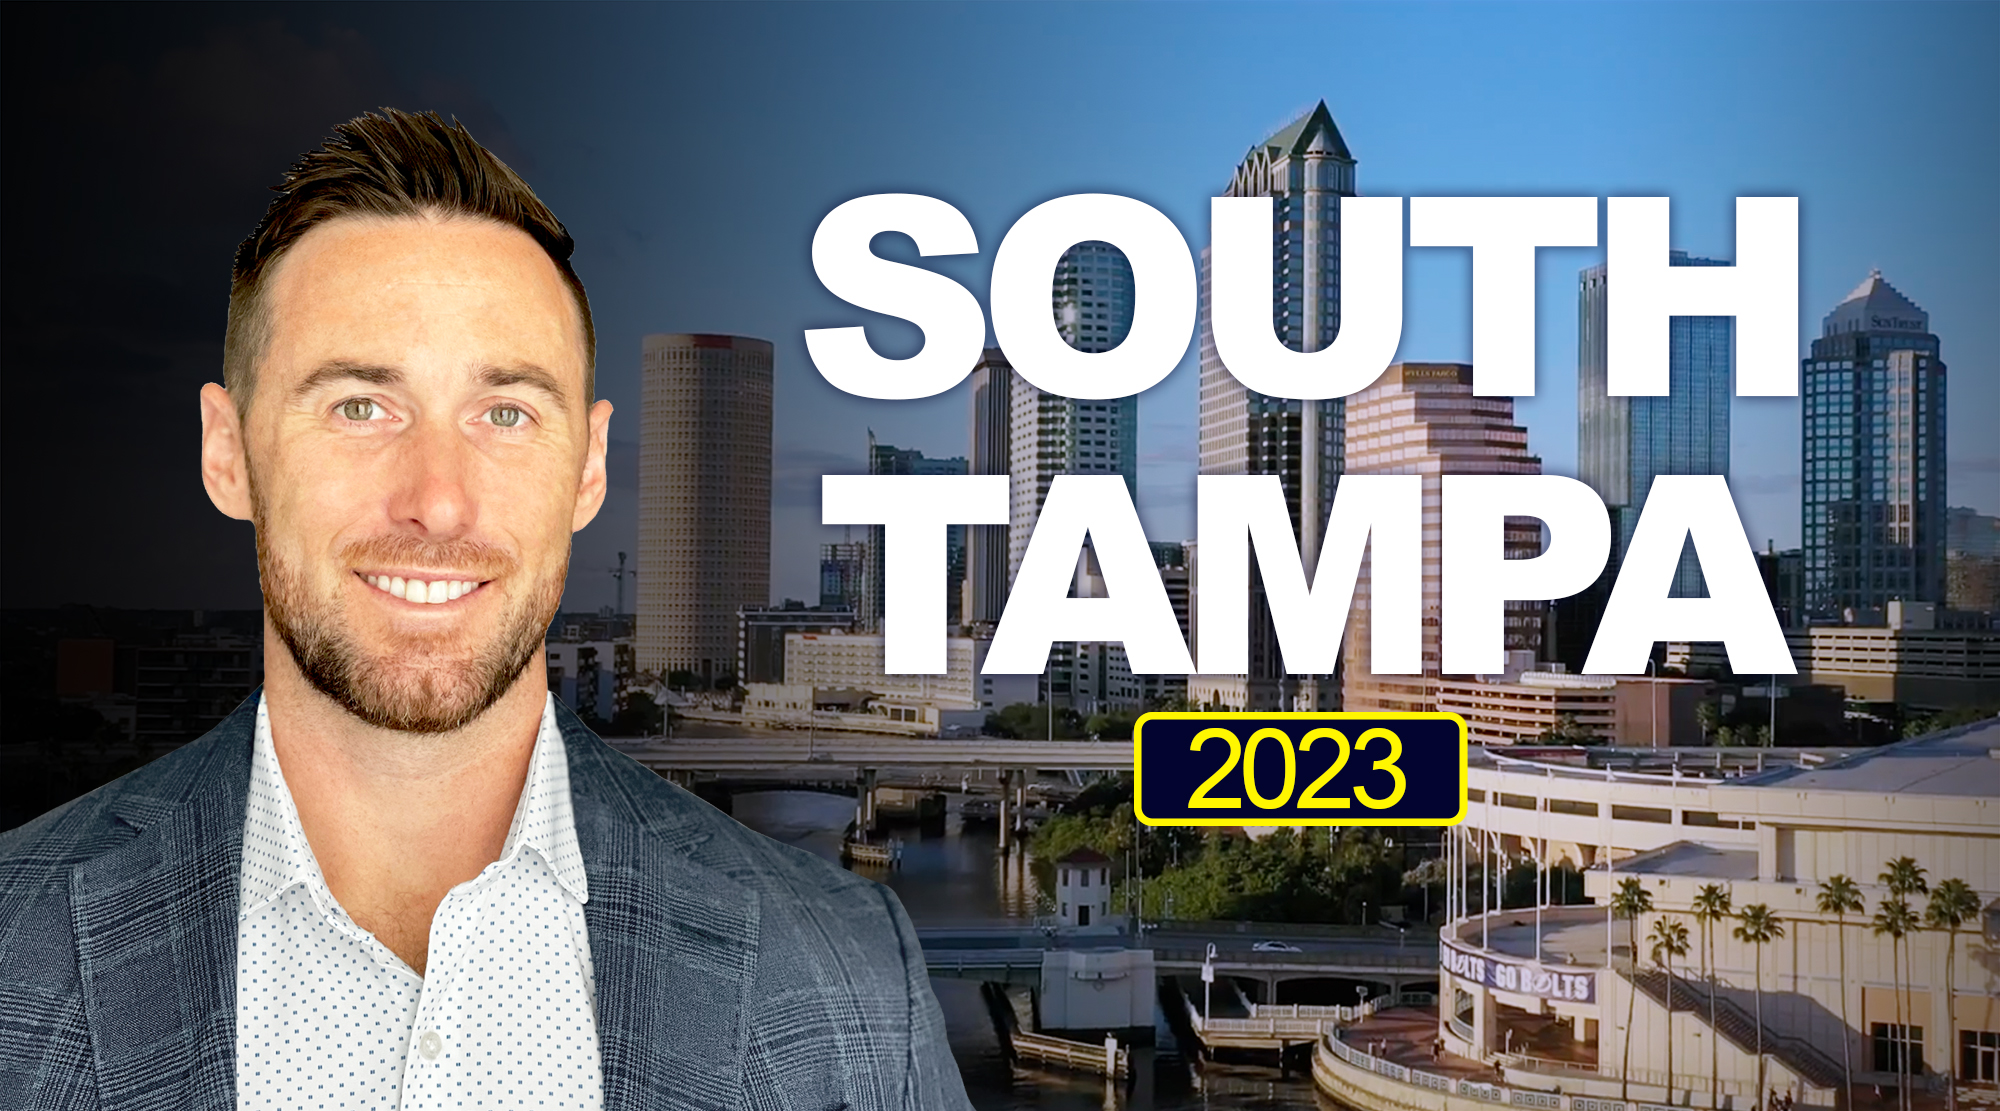 South Tampa in 2023